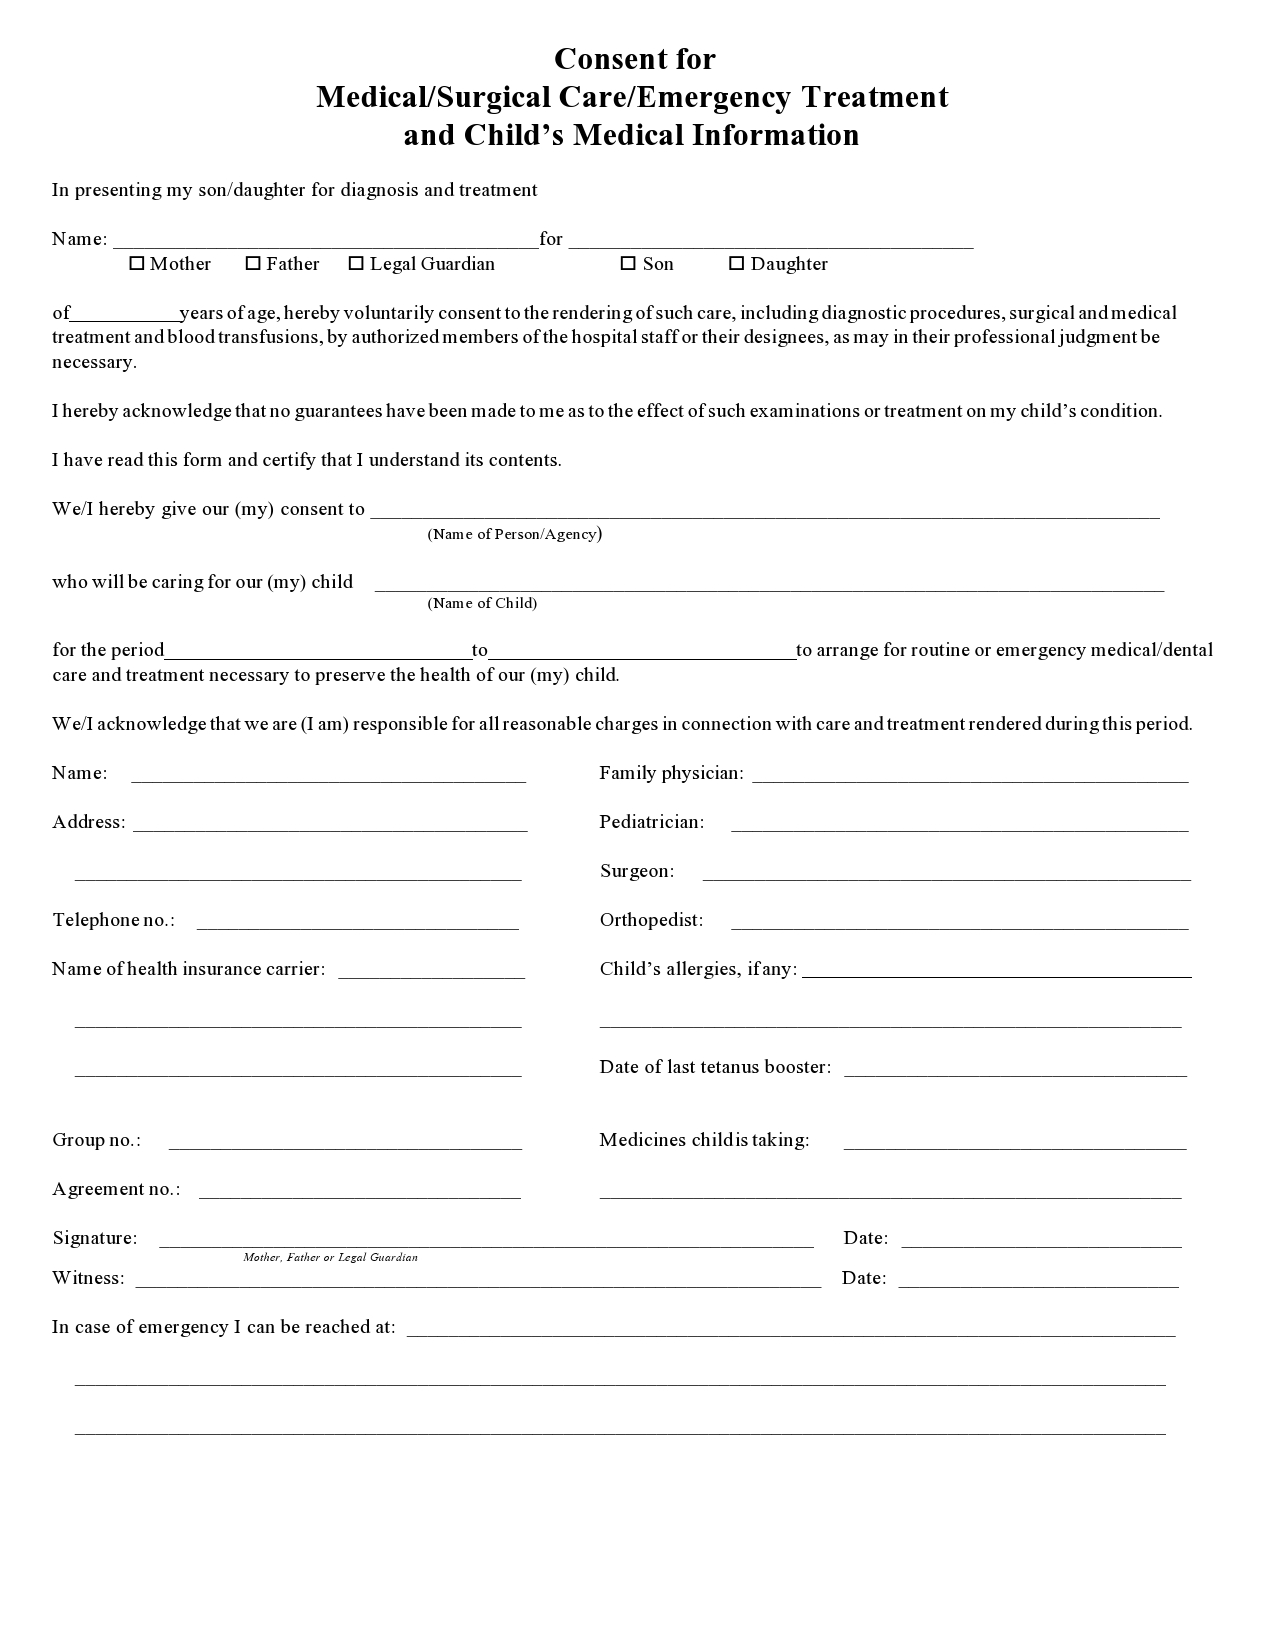 Free medical consent form for minor 18